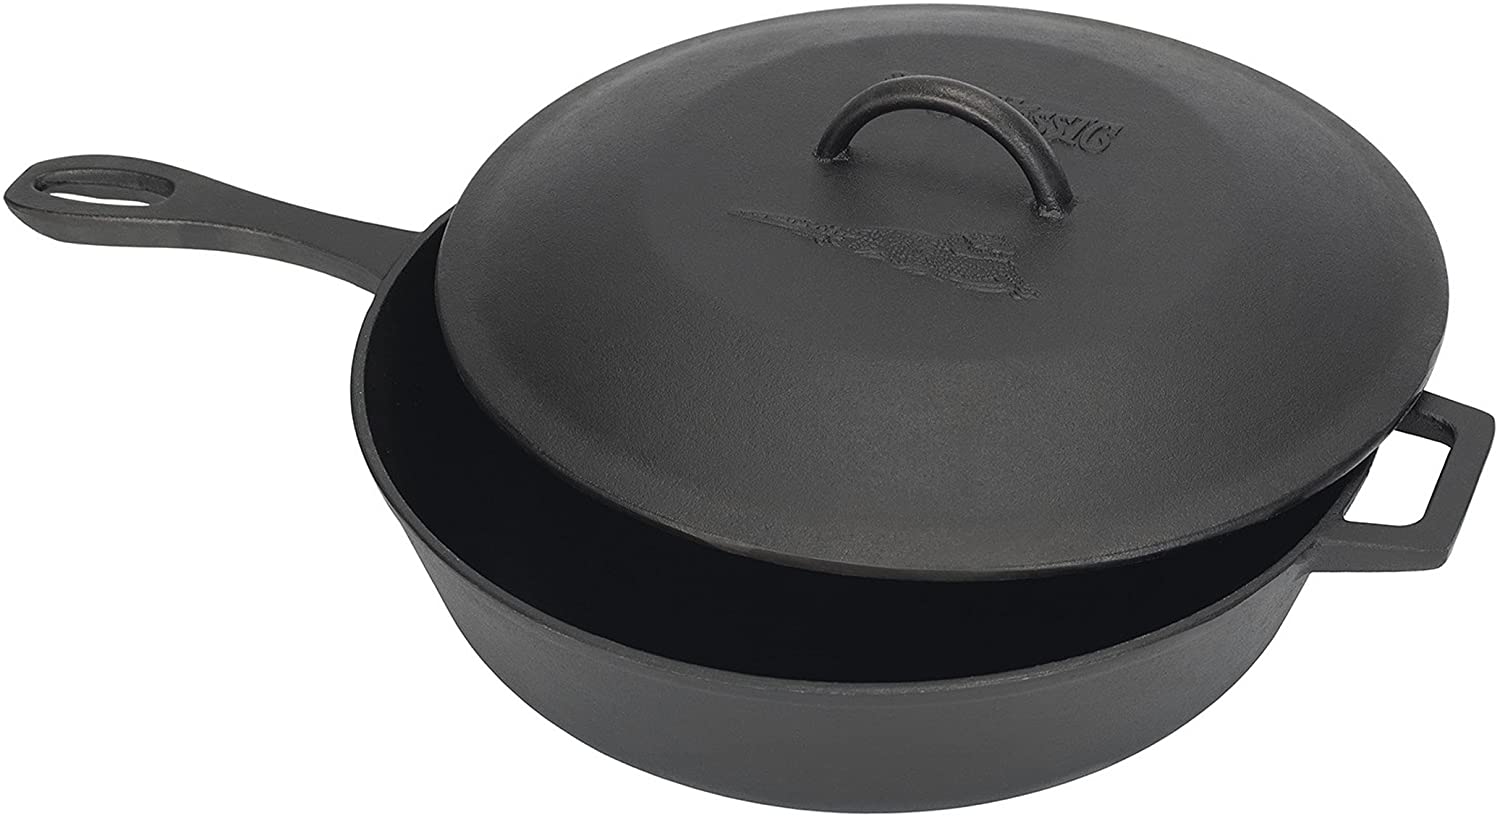 Bayou Classic 7445 Easy Clean Cast Iron Skillet With Lid, 5-Quart